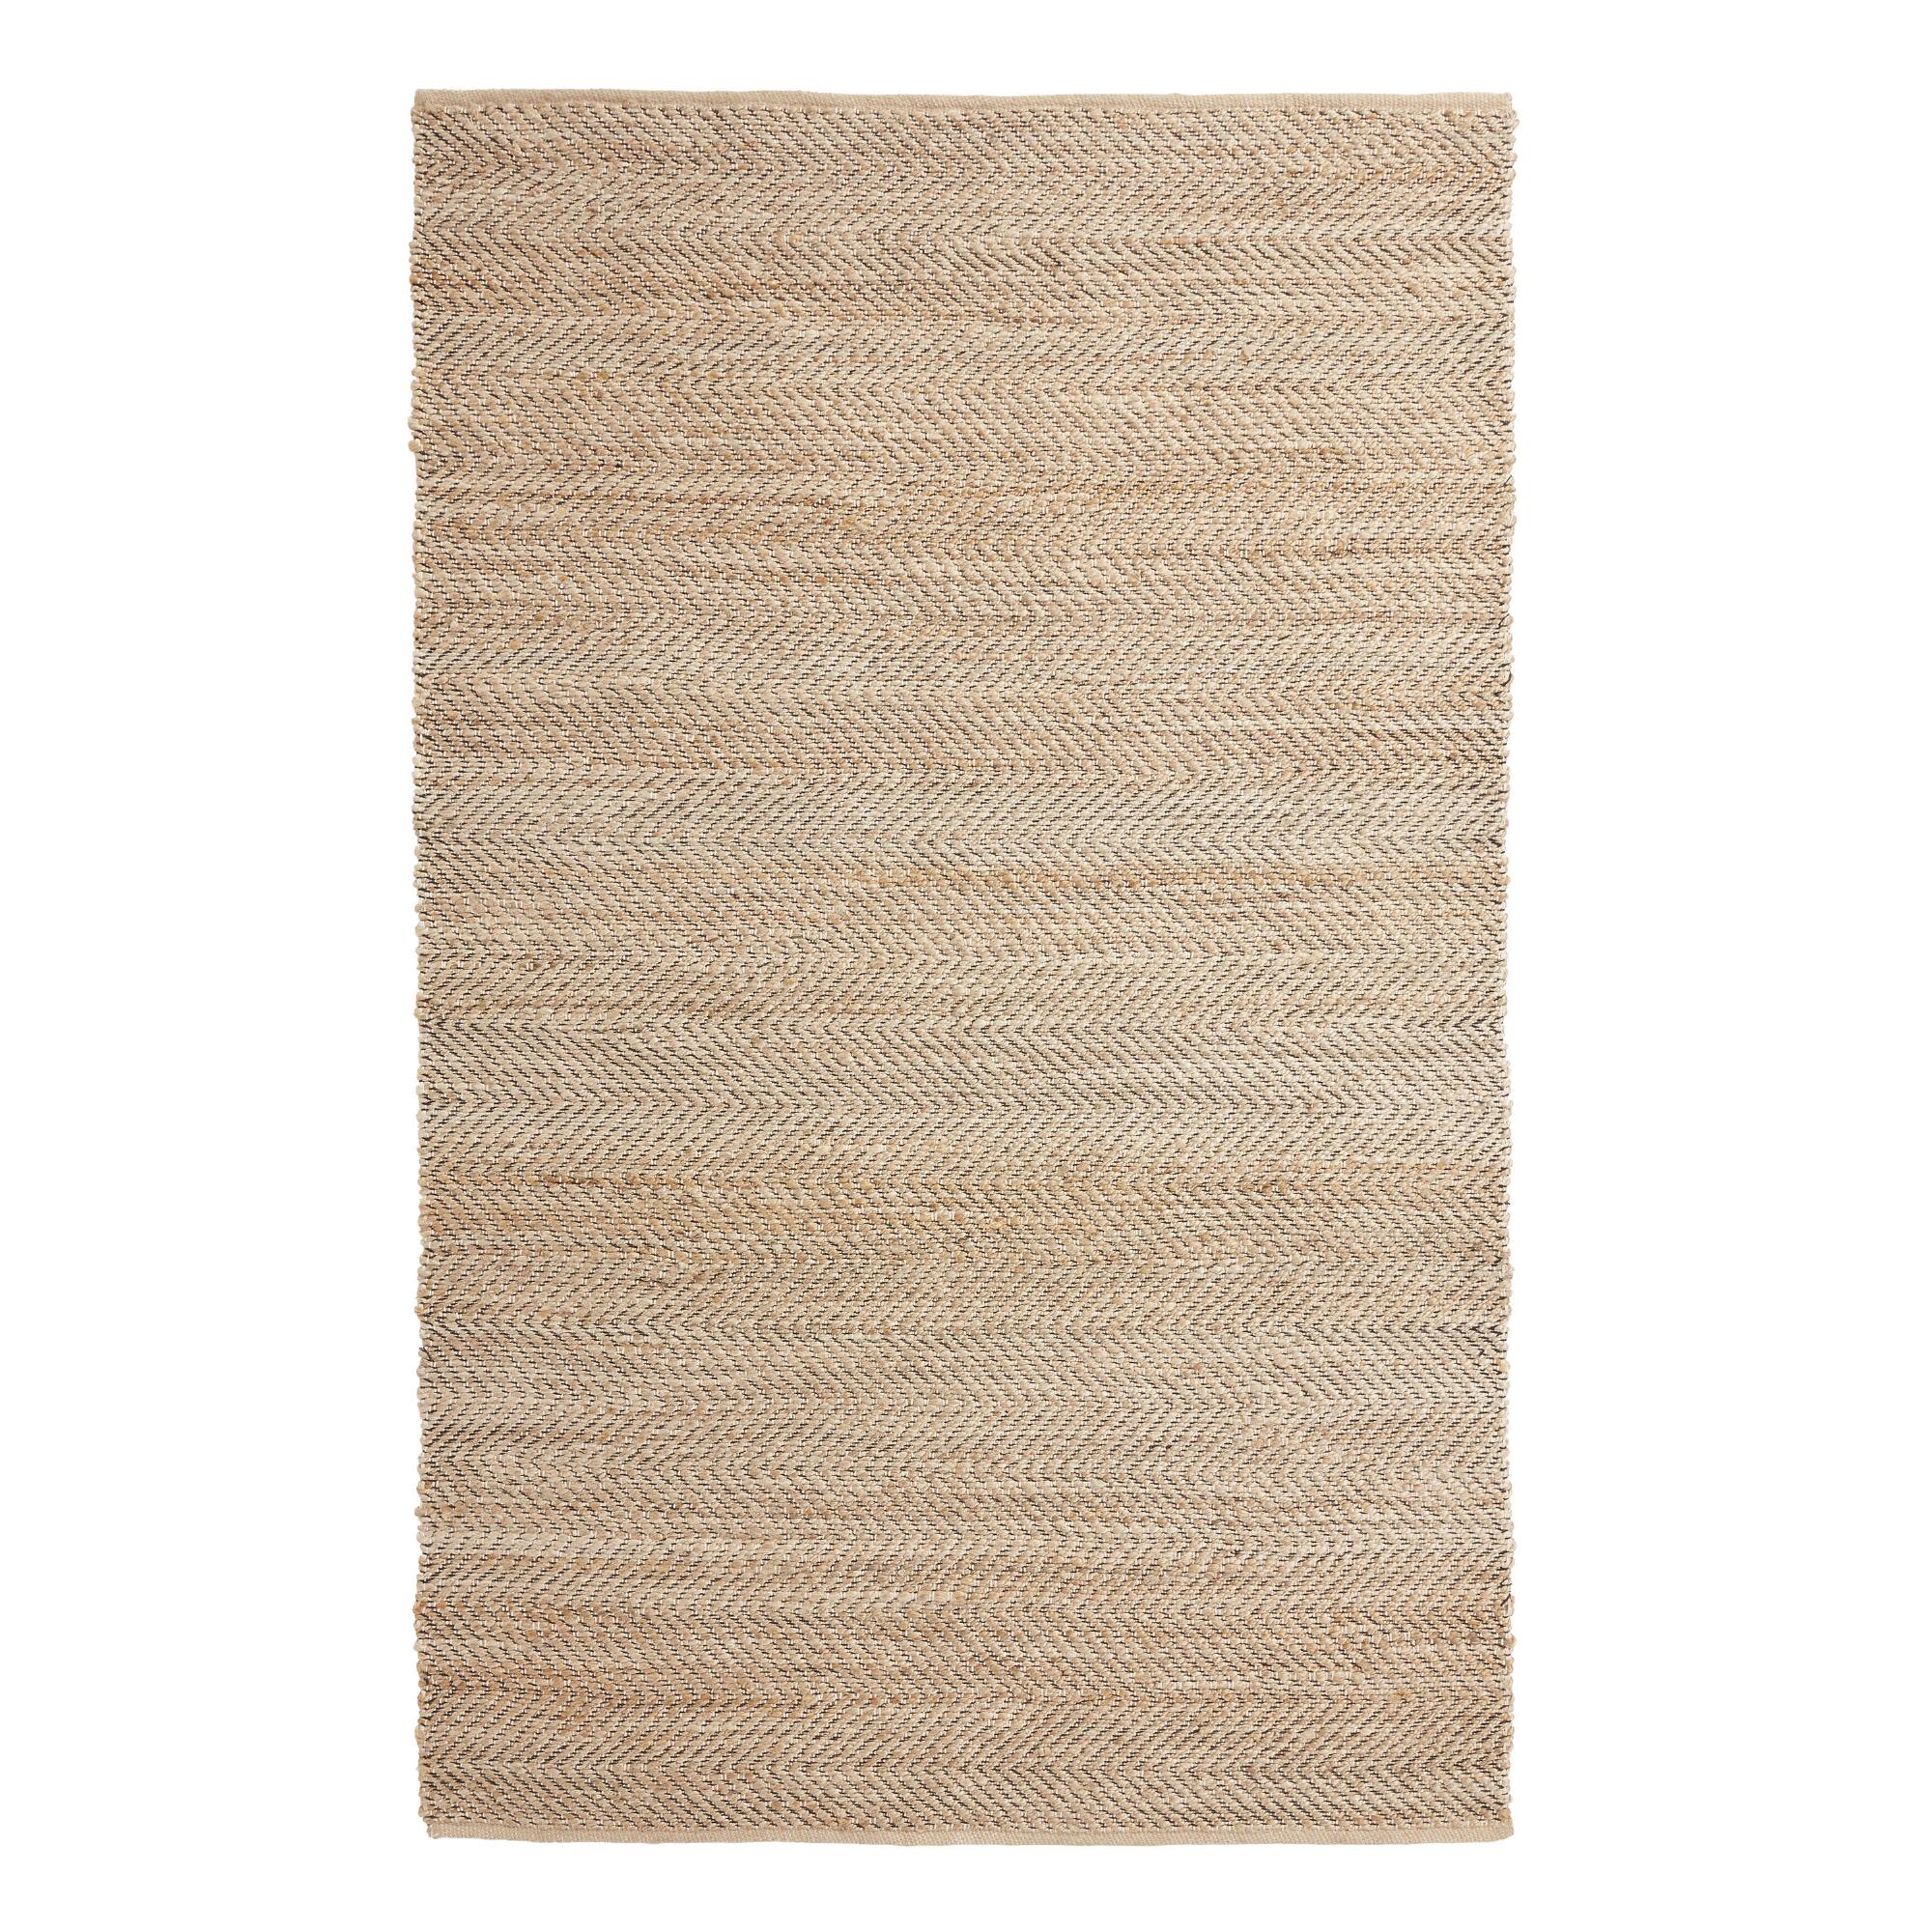 Natural and Black Jute and Cotton Chevron Reversible Rug - 5' x 8' by World Market